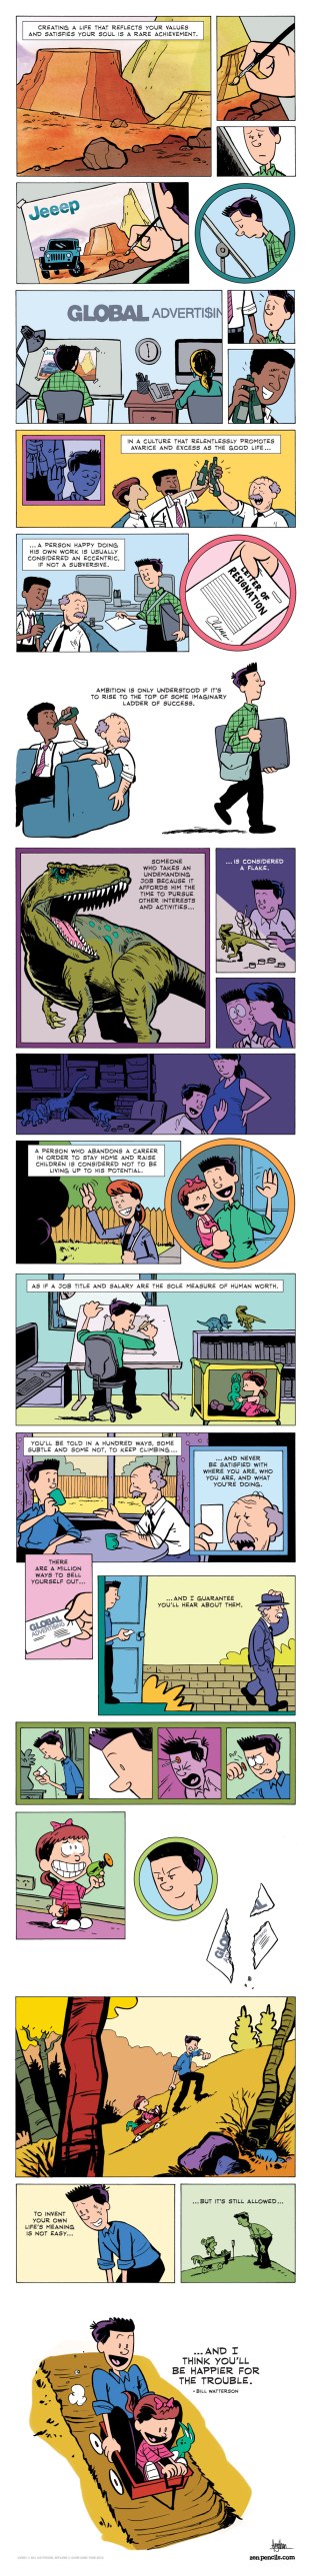 This just about sums it all up.  Artwork by Gavin Aung Than of www.zenpencils.com, who apparently is a budding genius.